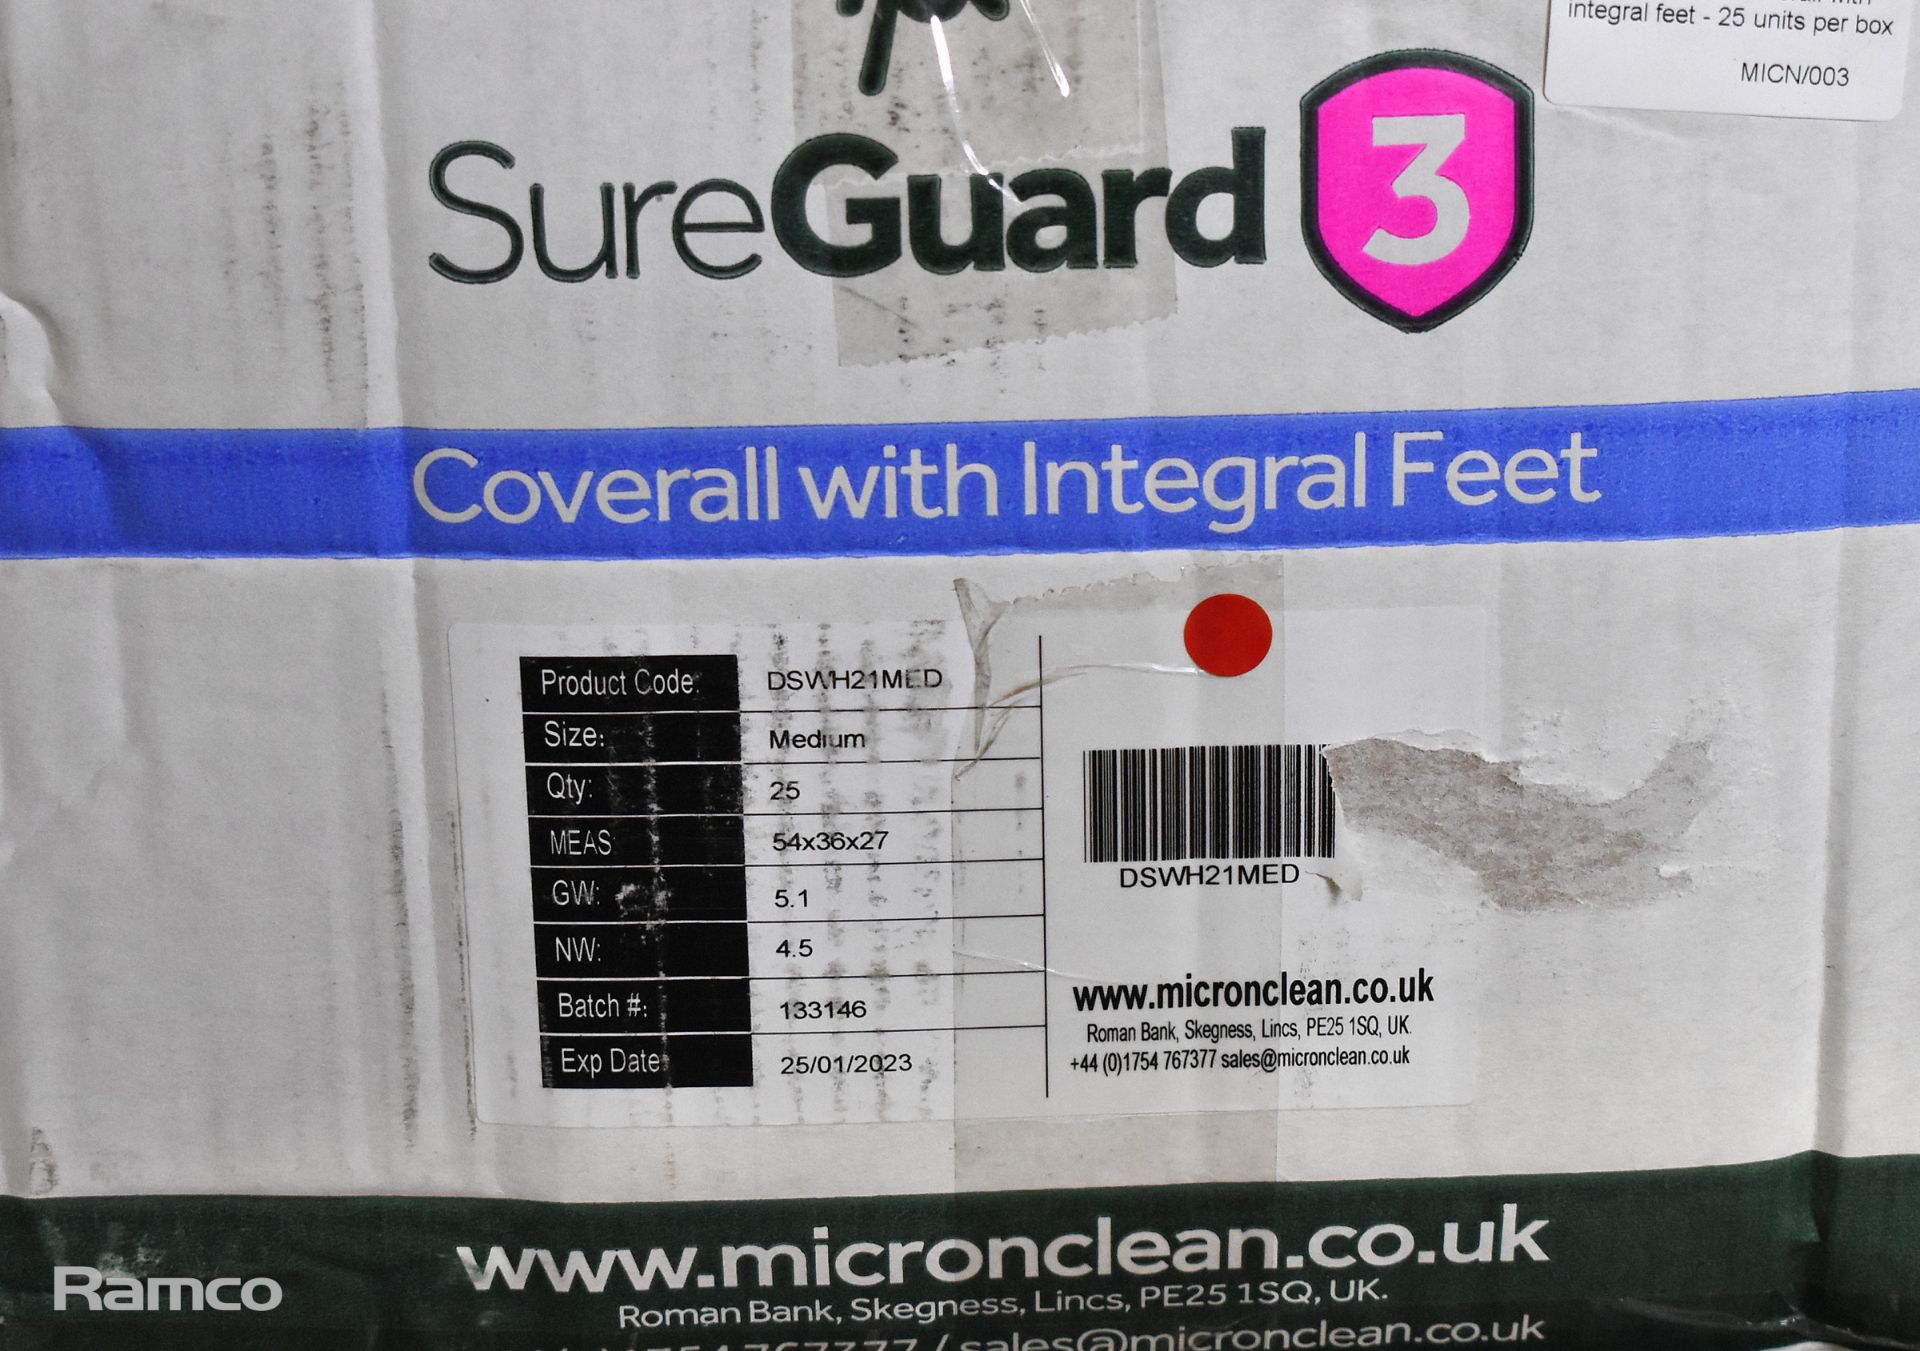 5x boxes of MicroClean SureGuard 3 - size small coverall with integral feet - 25 units per box - Bild 2 aus 2